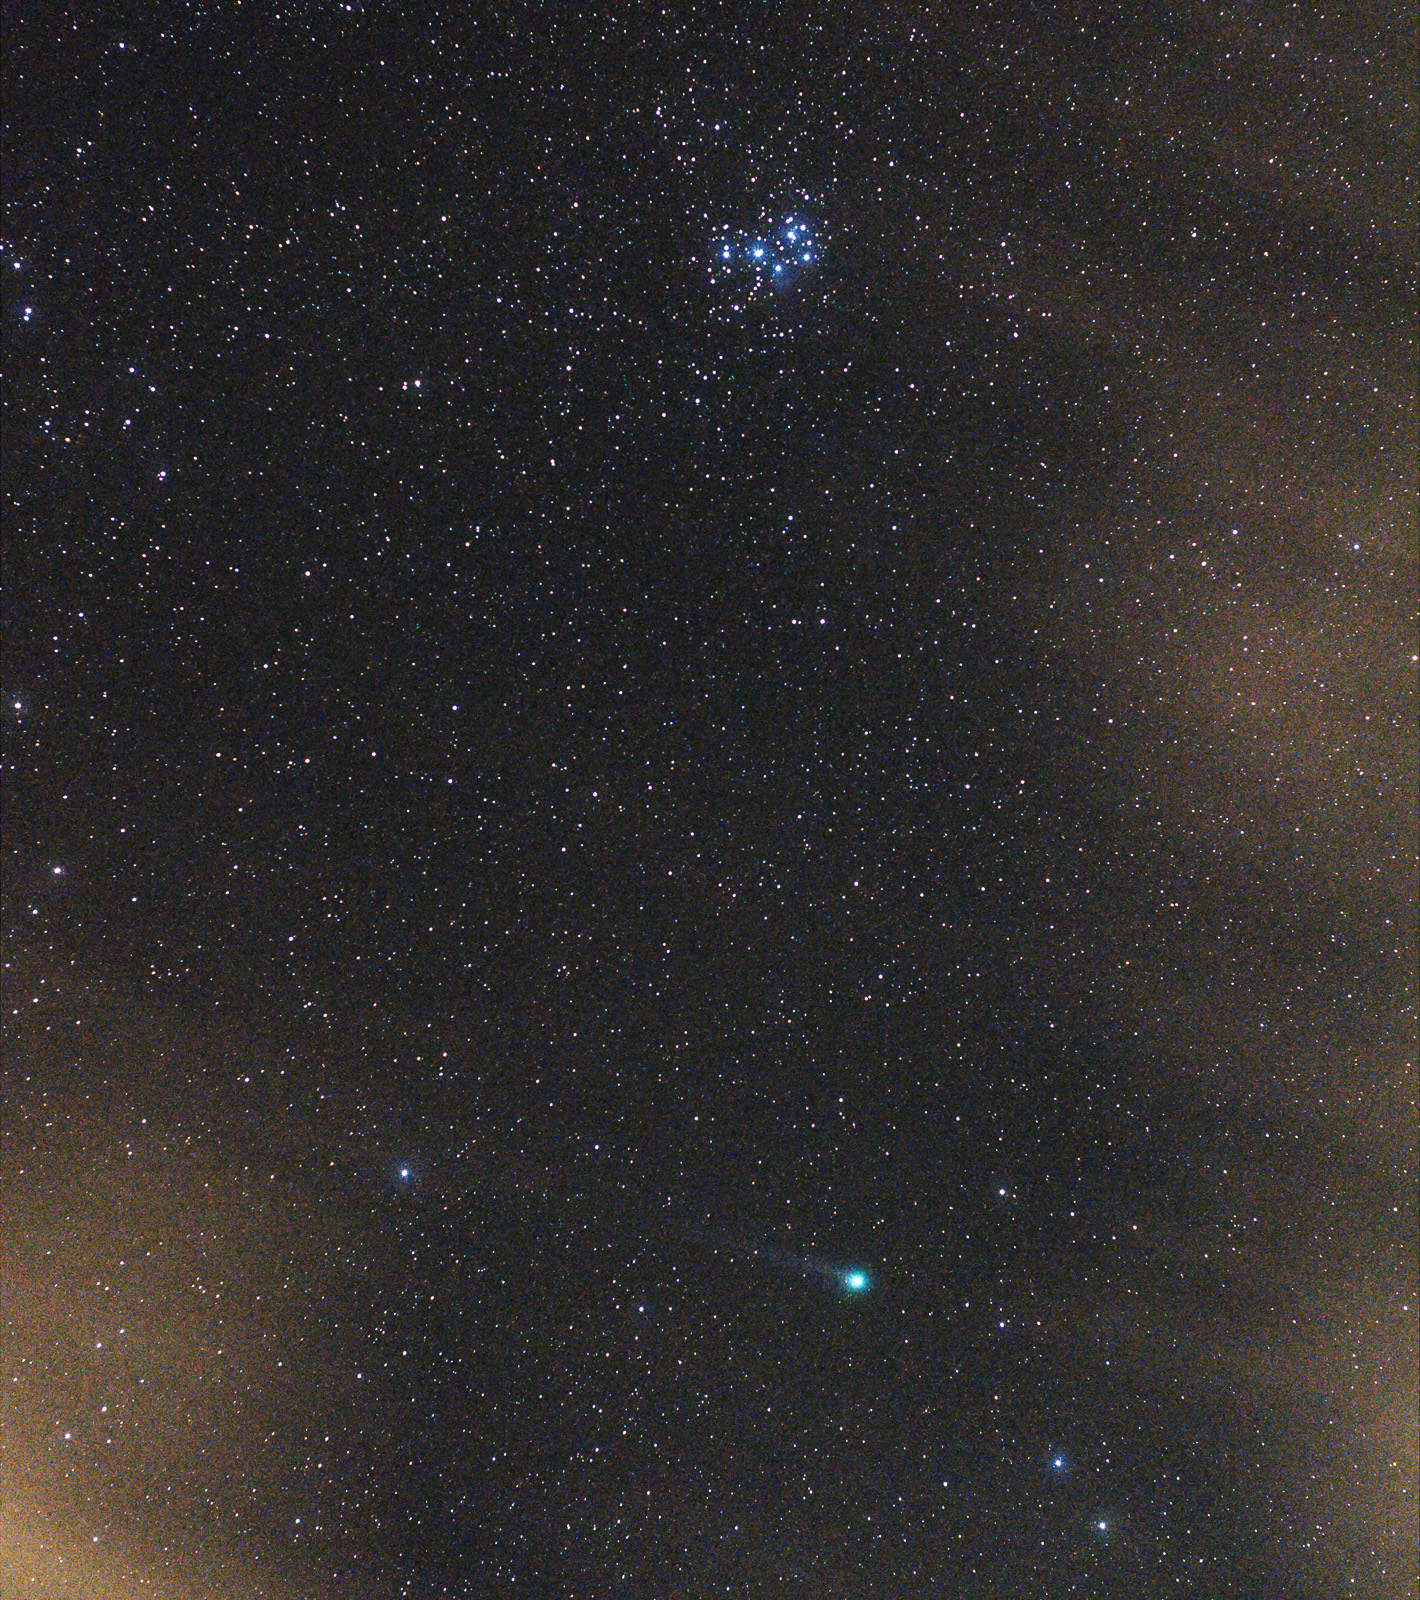 Comet Lovejoy and the Plejades, 3x10s, ISO3200, 50mm at f/4, cropped